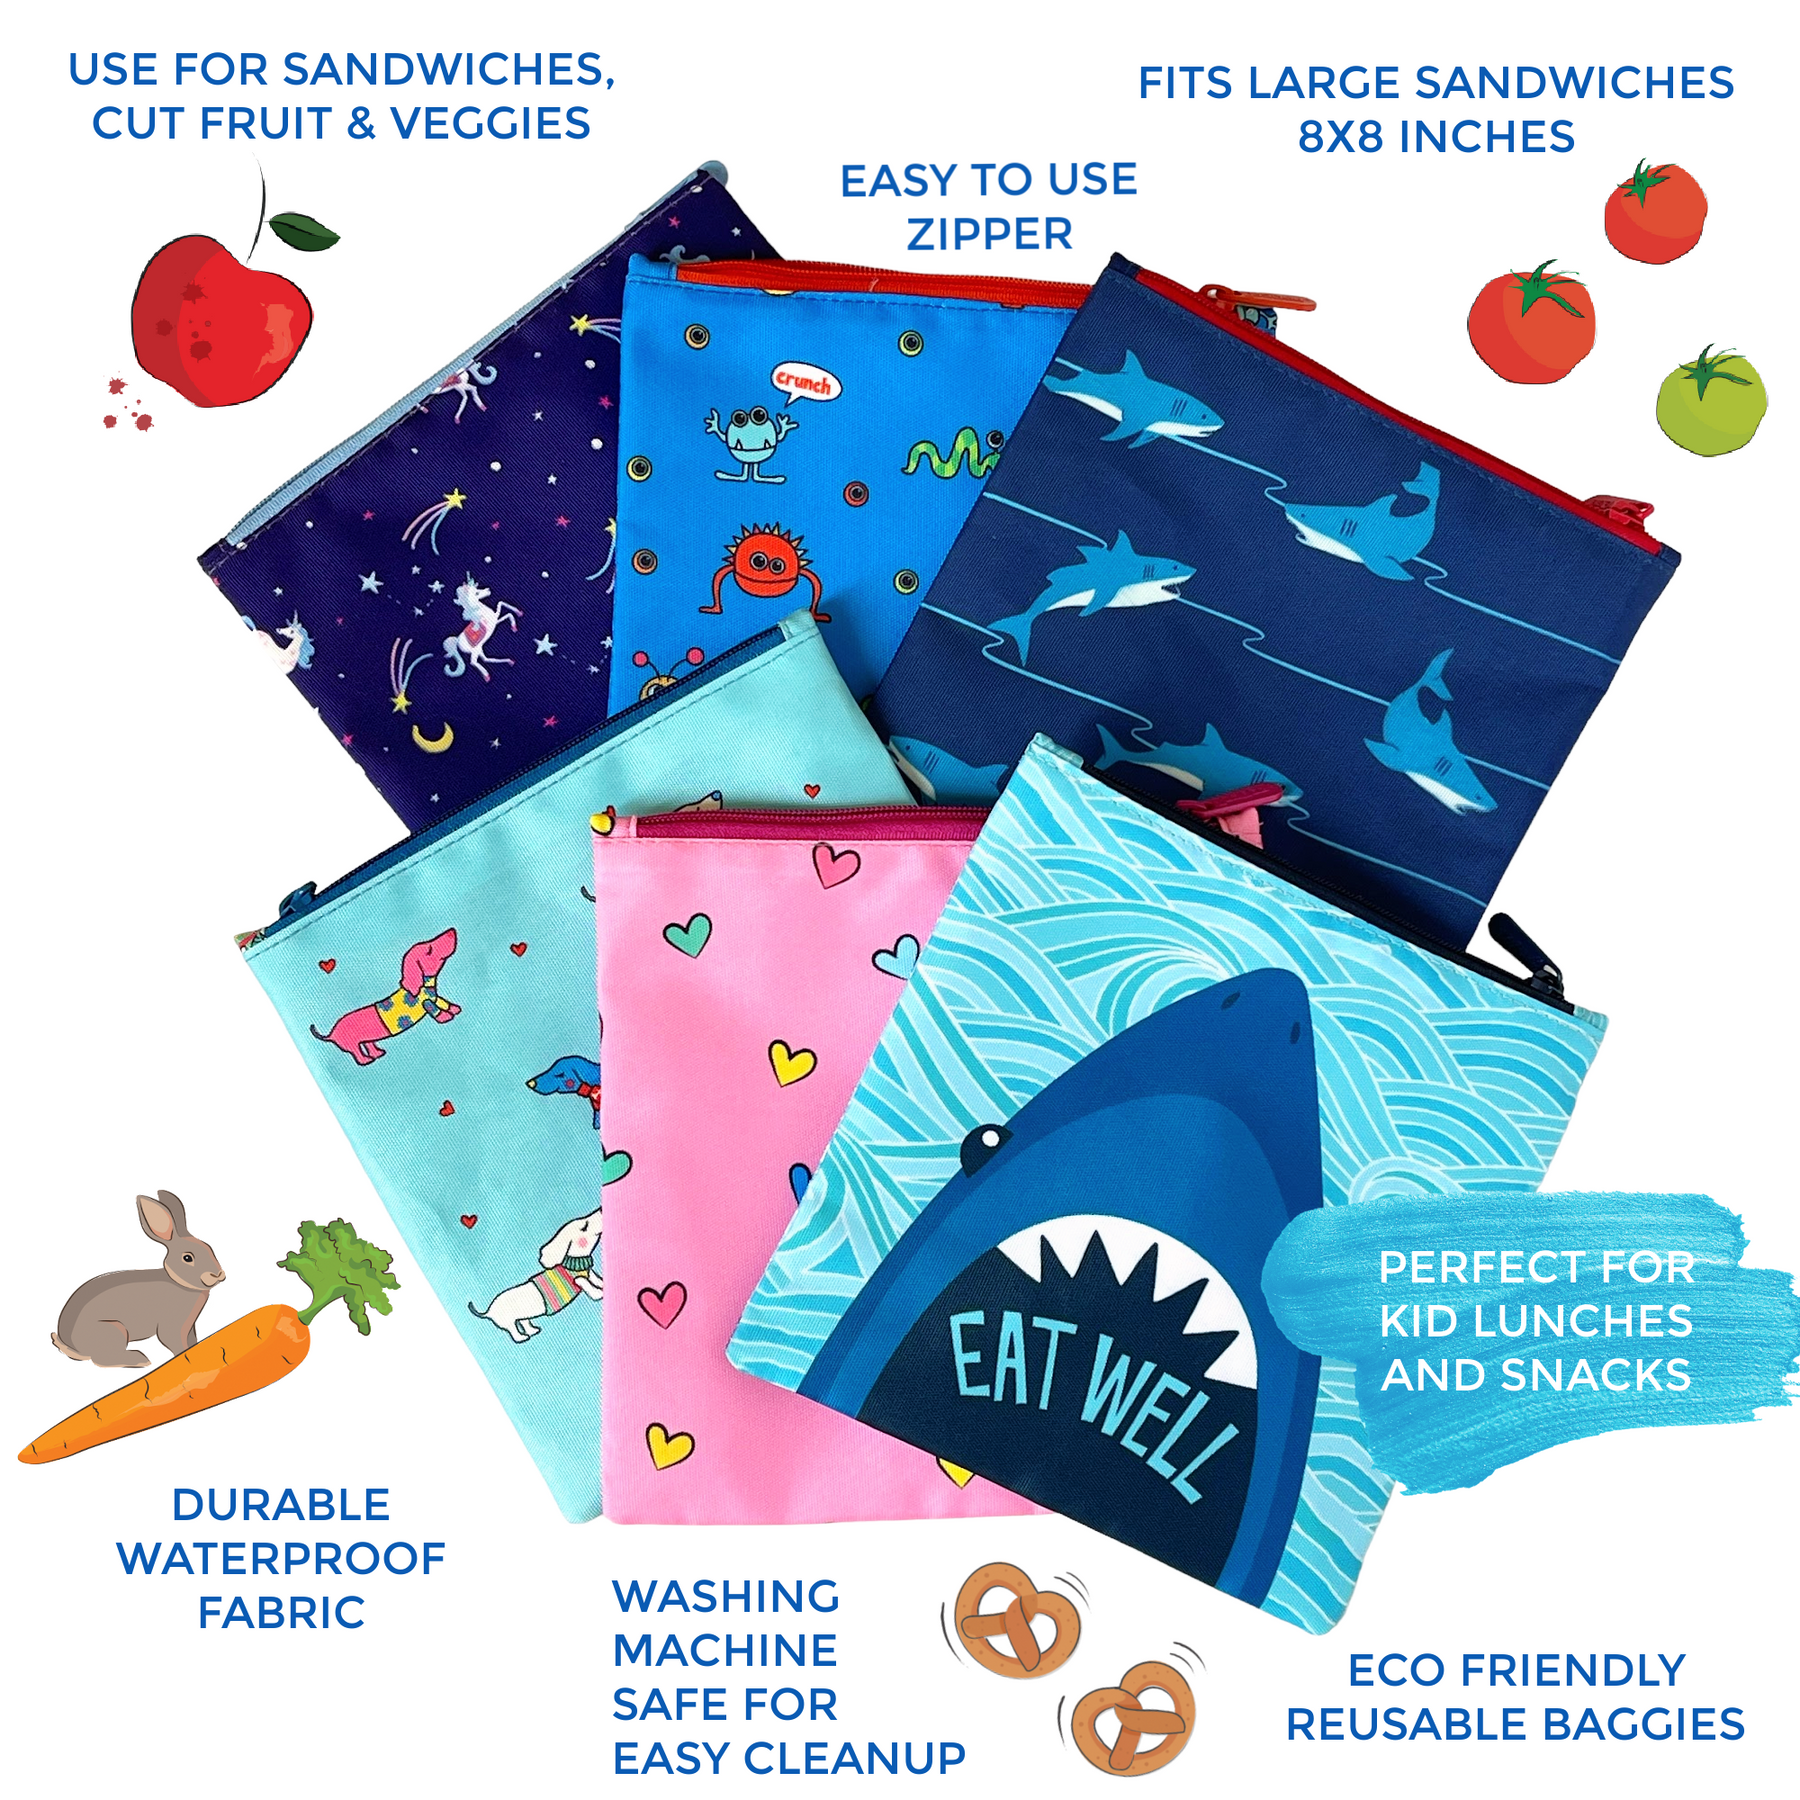 Yumbox Reusable Fabric Sandwich and Snack Bags (2-Pack) Navy & Zesty Polka  Dots for Adults and Kids lunches. Eco-Friendly, Velcro Close, Wide Opening